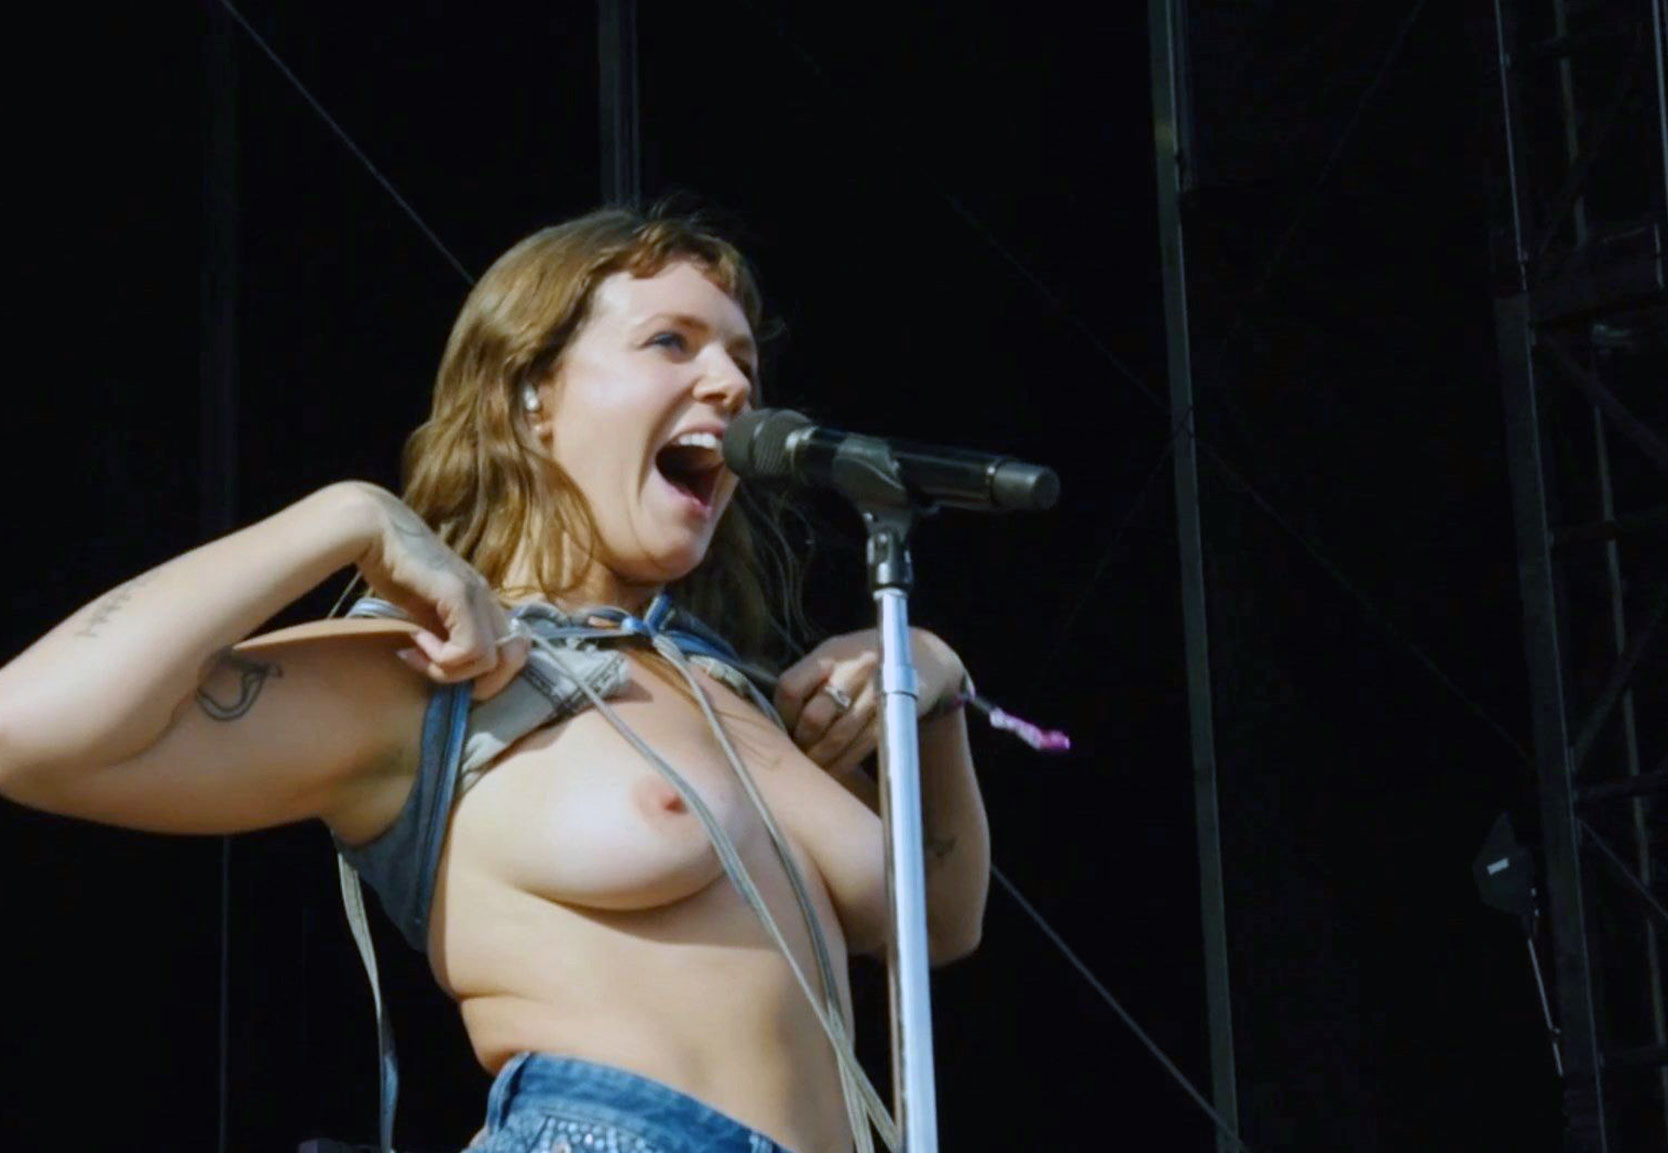 Tove Lo Nude and Topless on Stage.